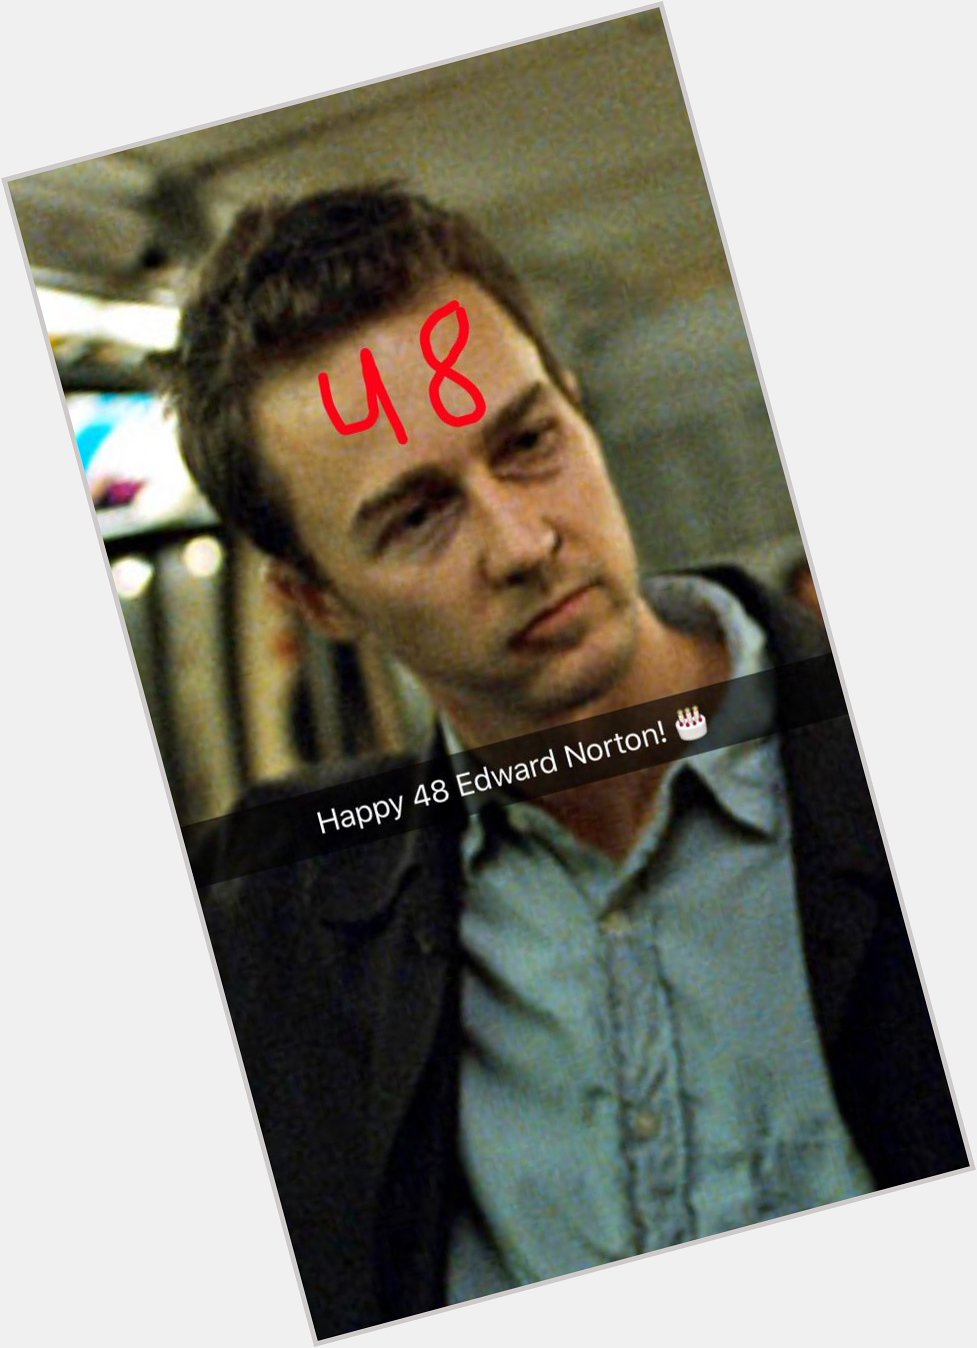  Happy Birthday Edward Norton! Your somebody I want to work with some day. Have a great birthday! 